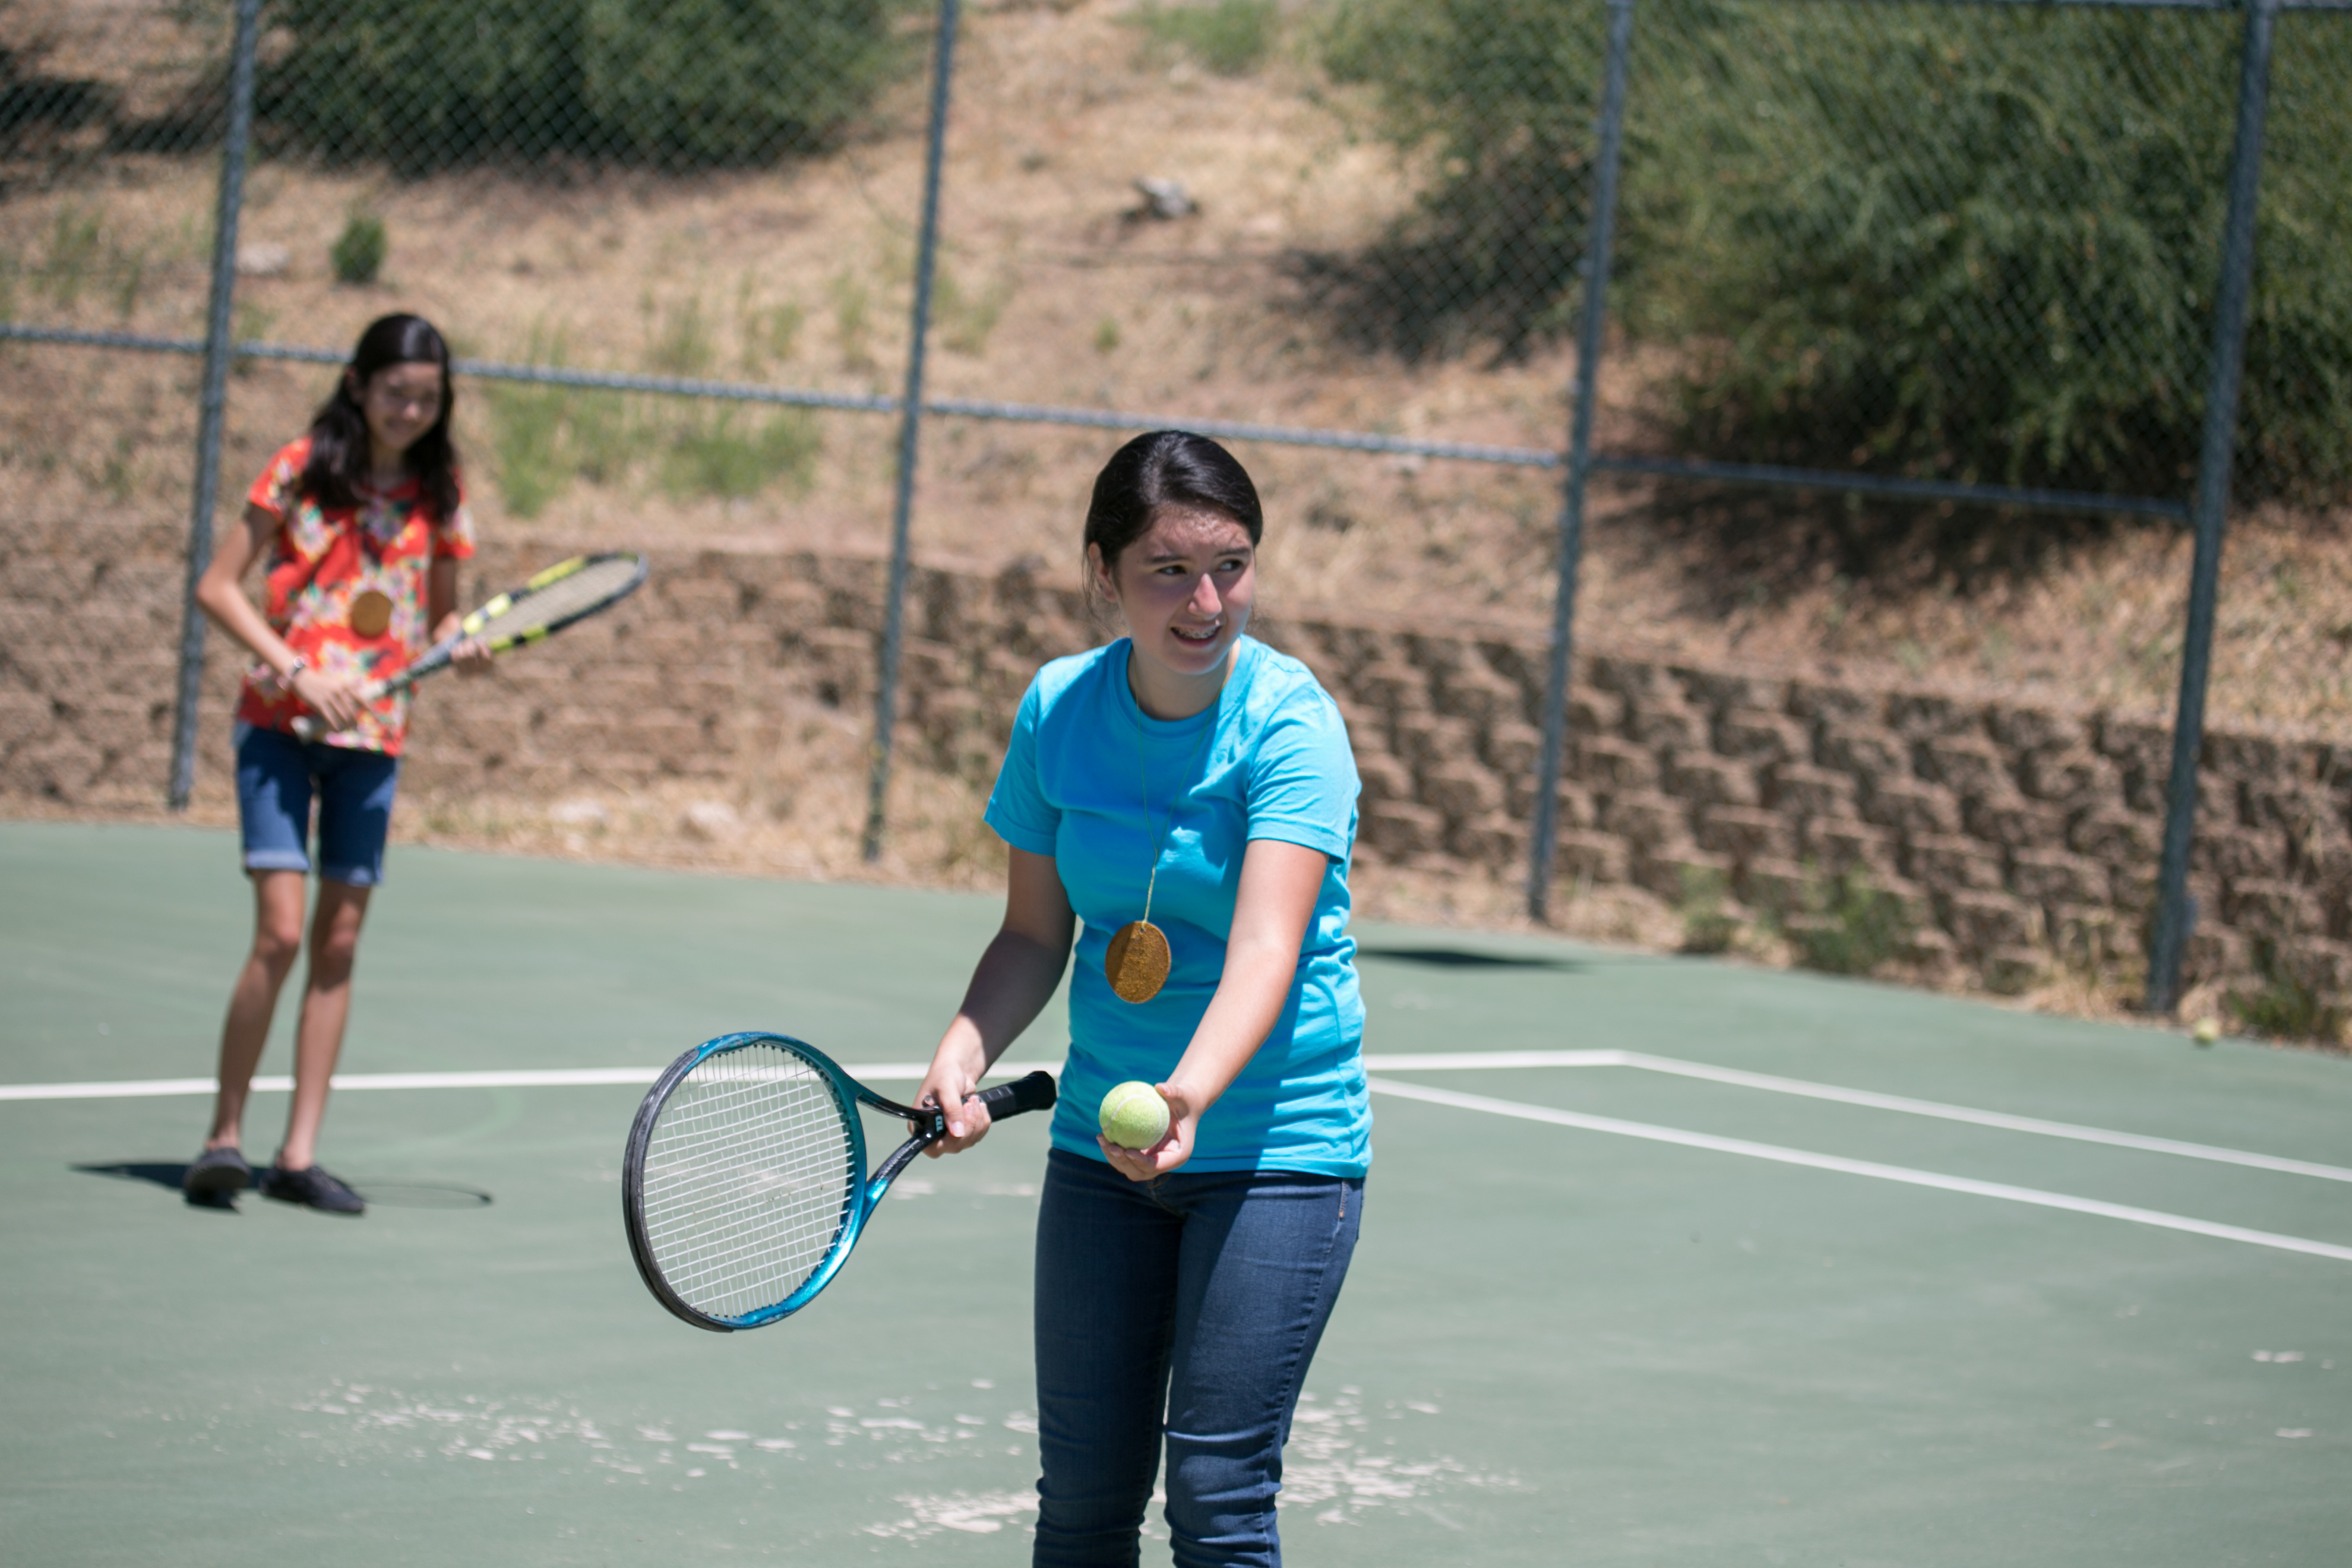 Teen girls with ball and raquets playing tennis on court